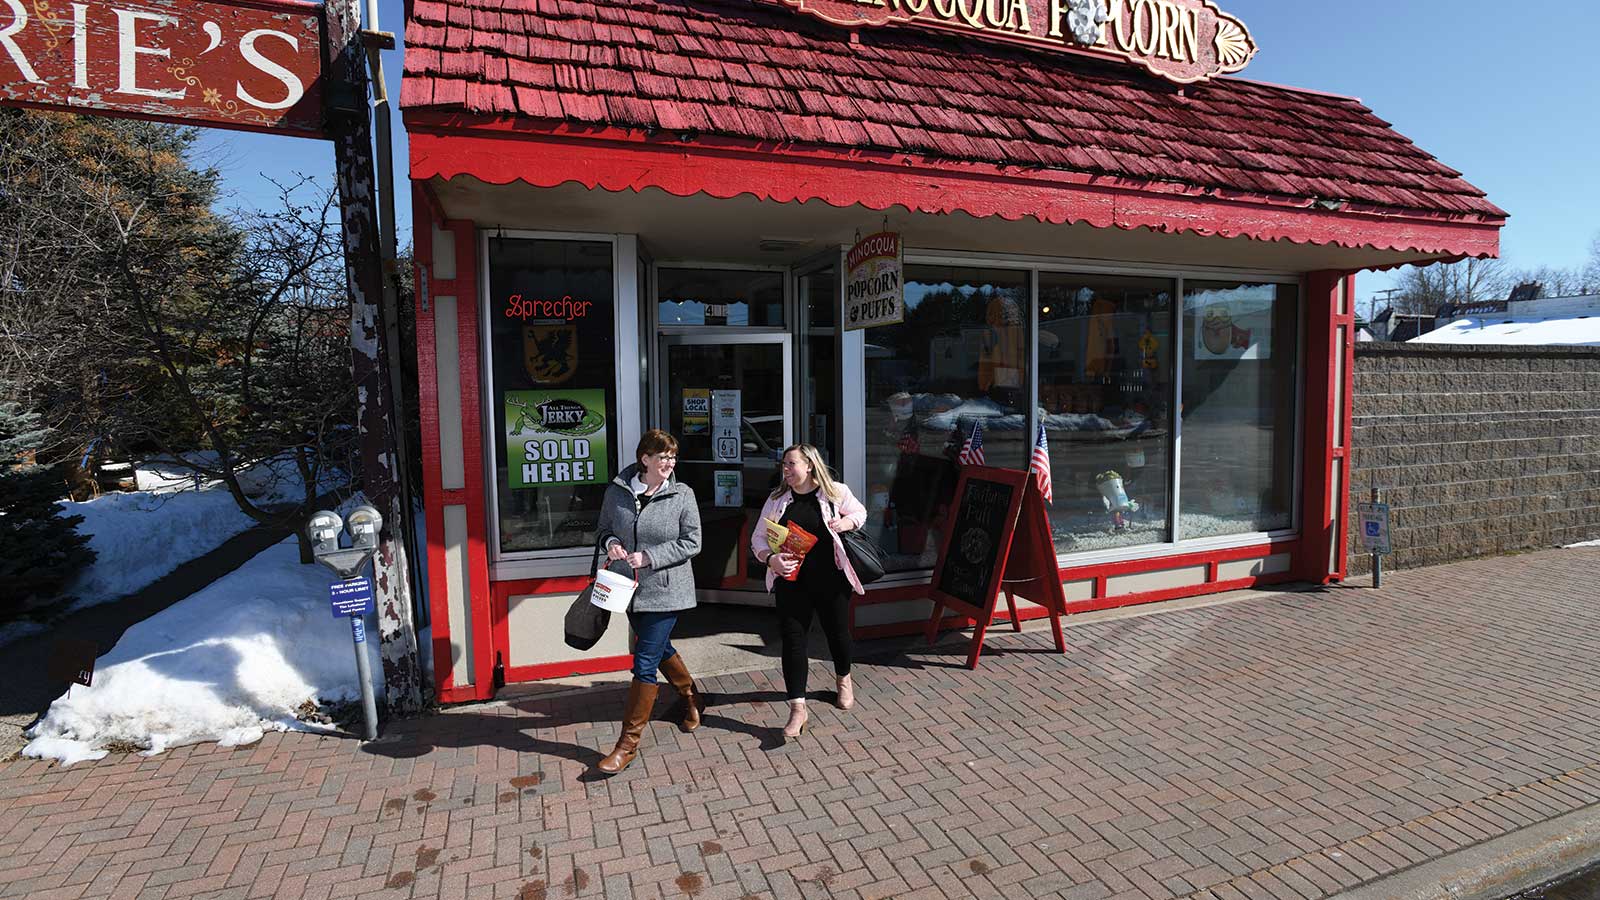 Some happy shoppers leaving Minocqua Popcorn and Puffs